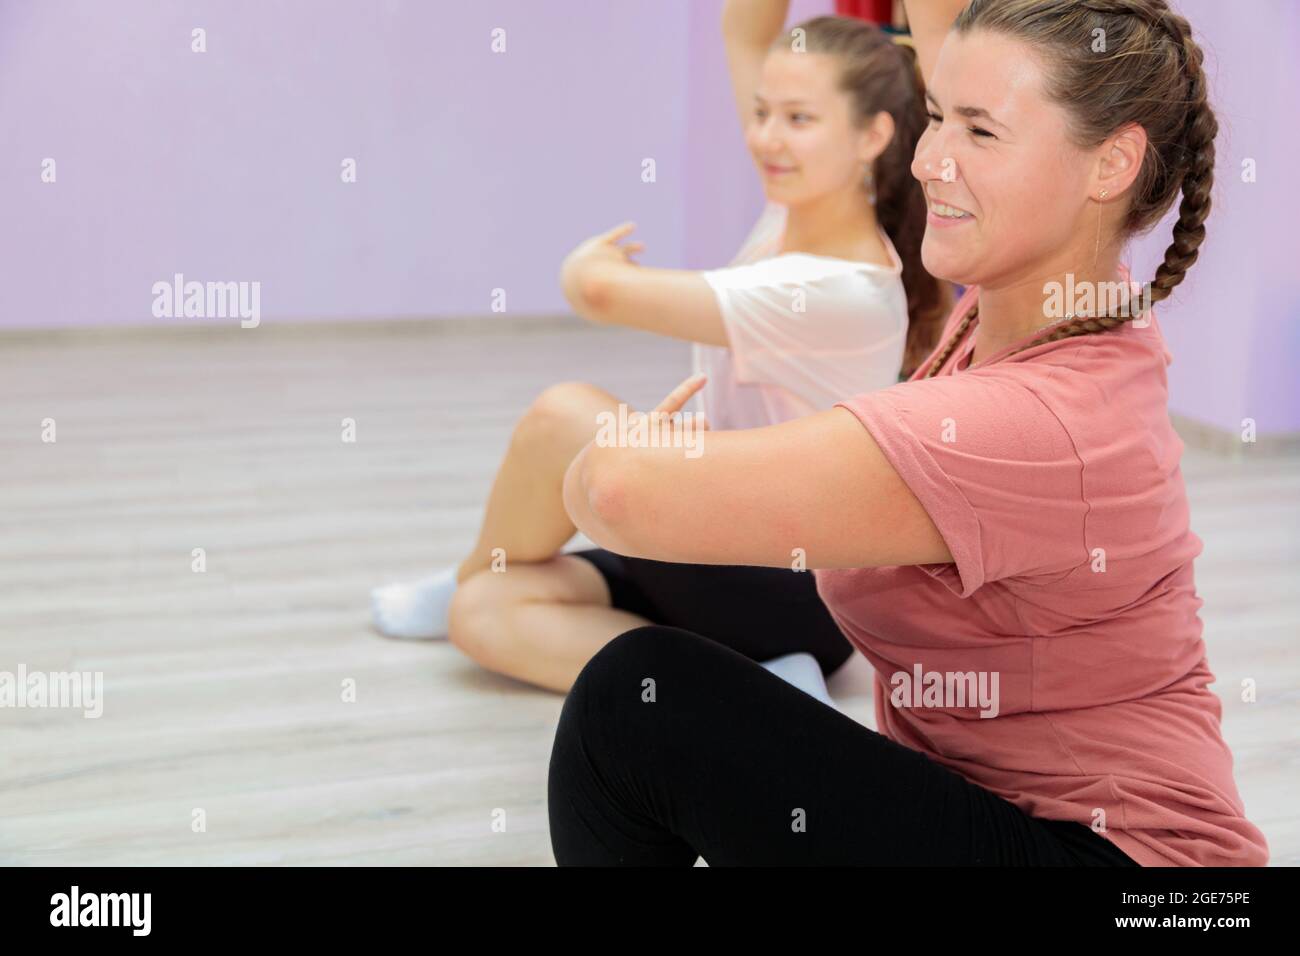 Girl dance instructor shows the elements of the number to another girl. Dance training. Stock Photo